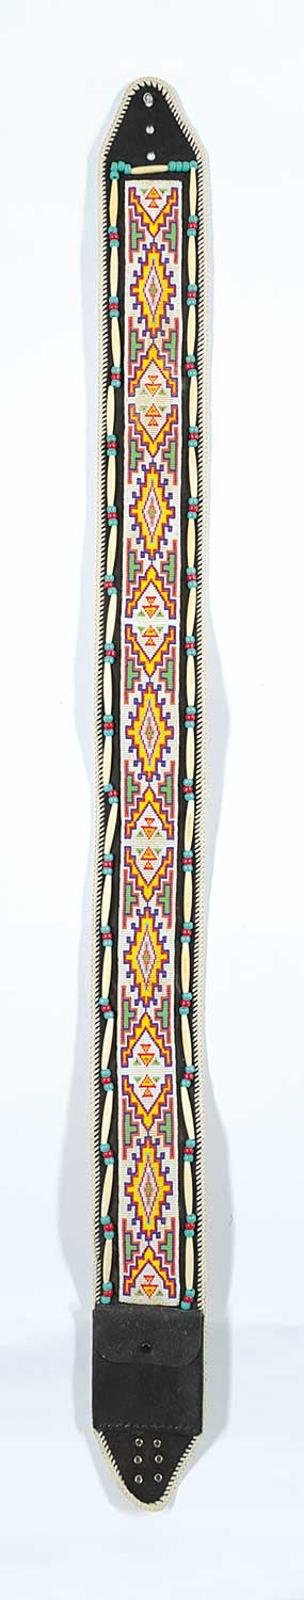 First Nations Basket School - Beaded Leather Belt